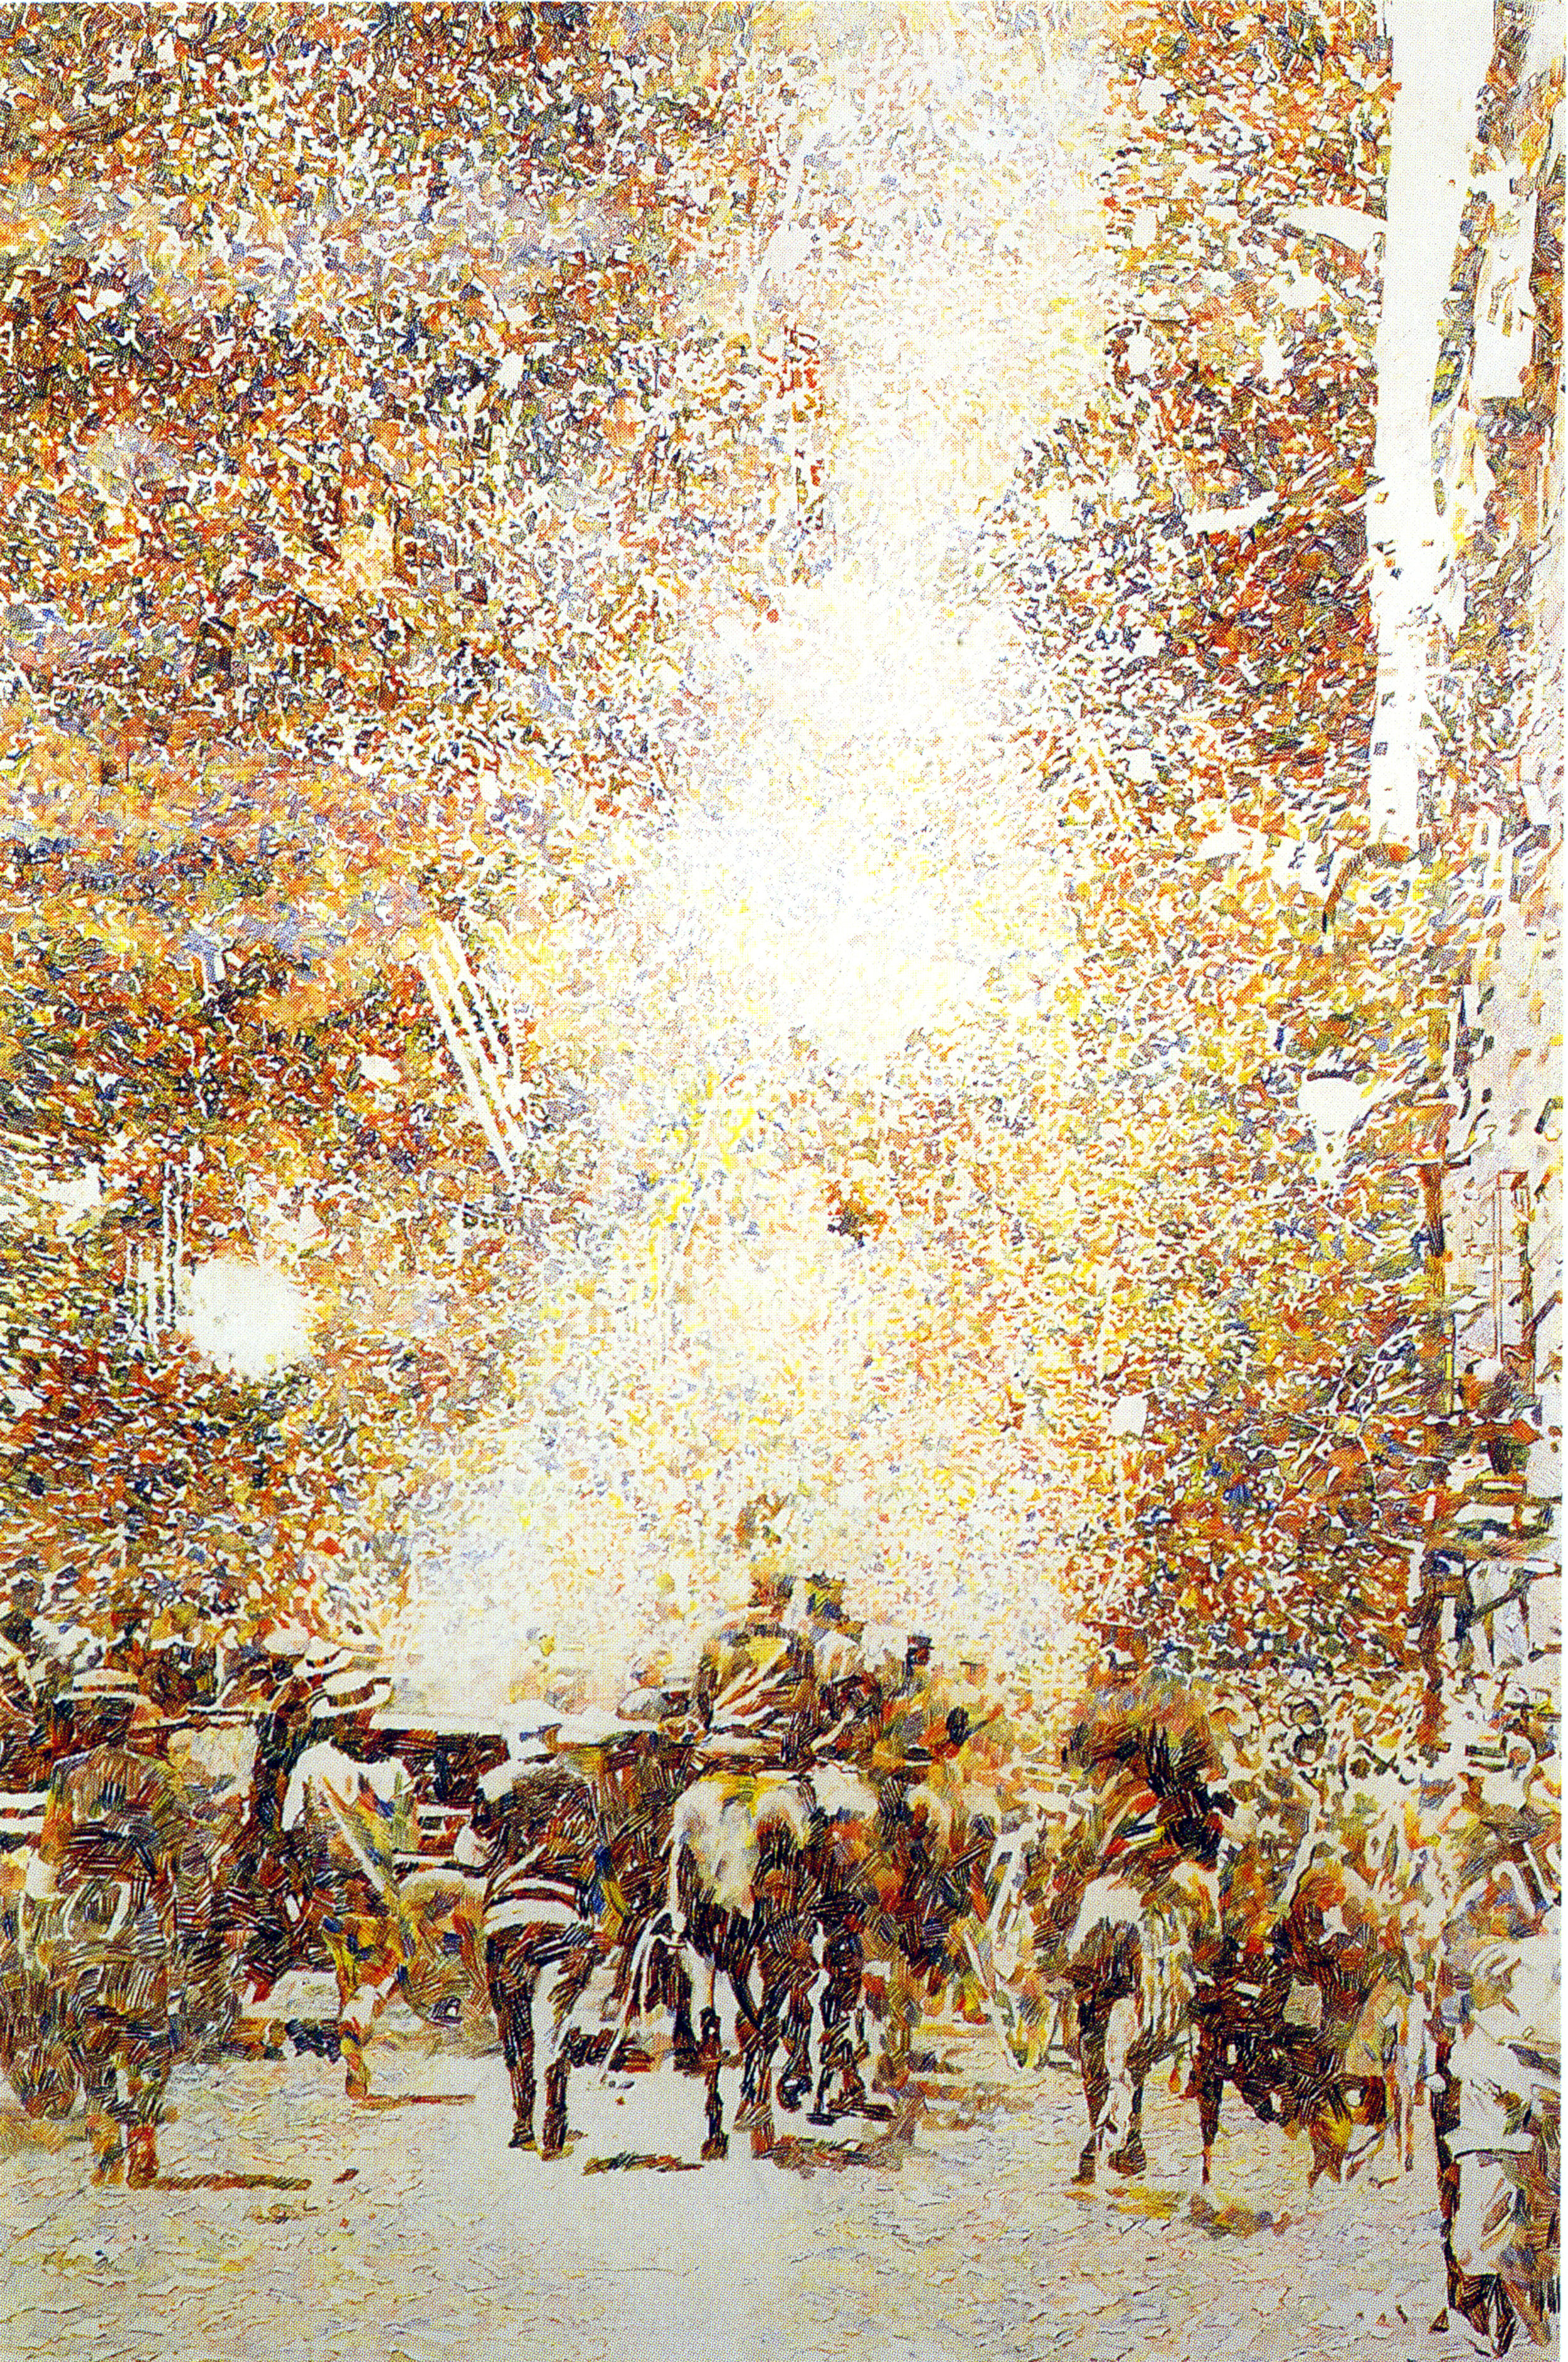 Ticker Tape Parade II, 2001-2002, Colored pencil on paper, 60 x 40 inches, Neuberger Berman Collection 